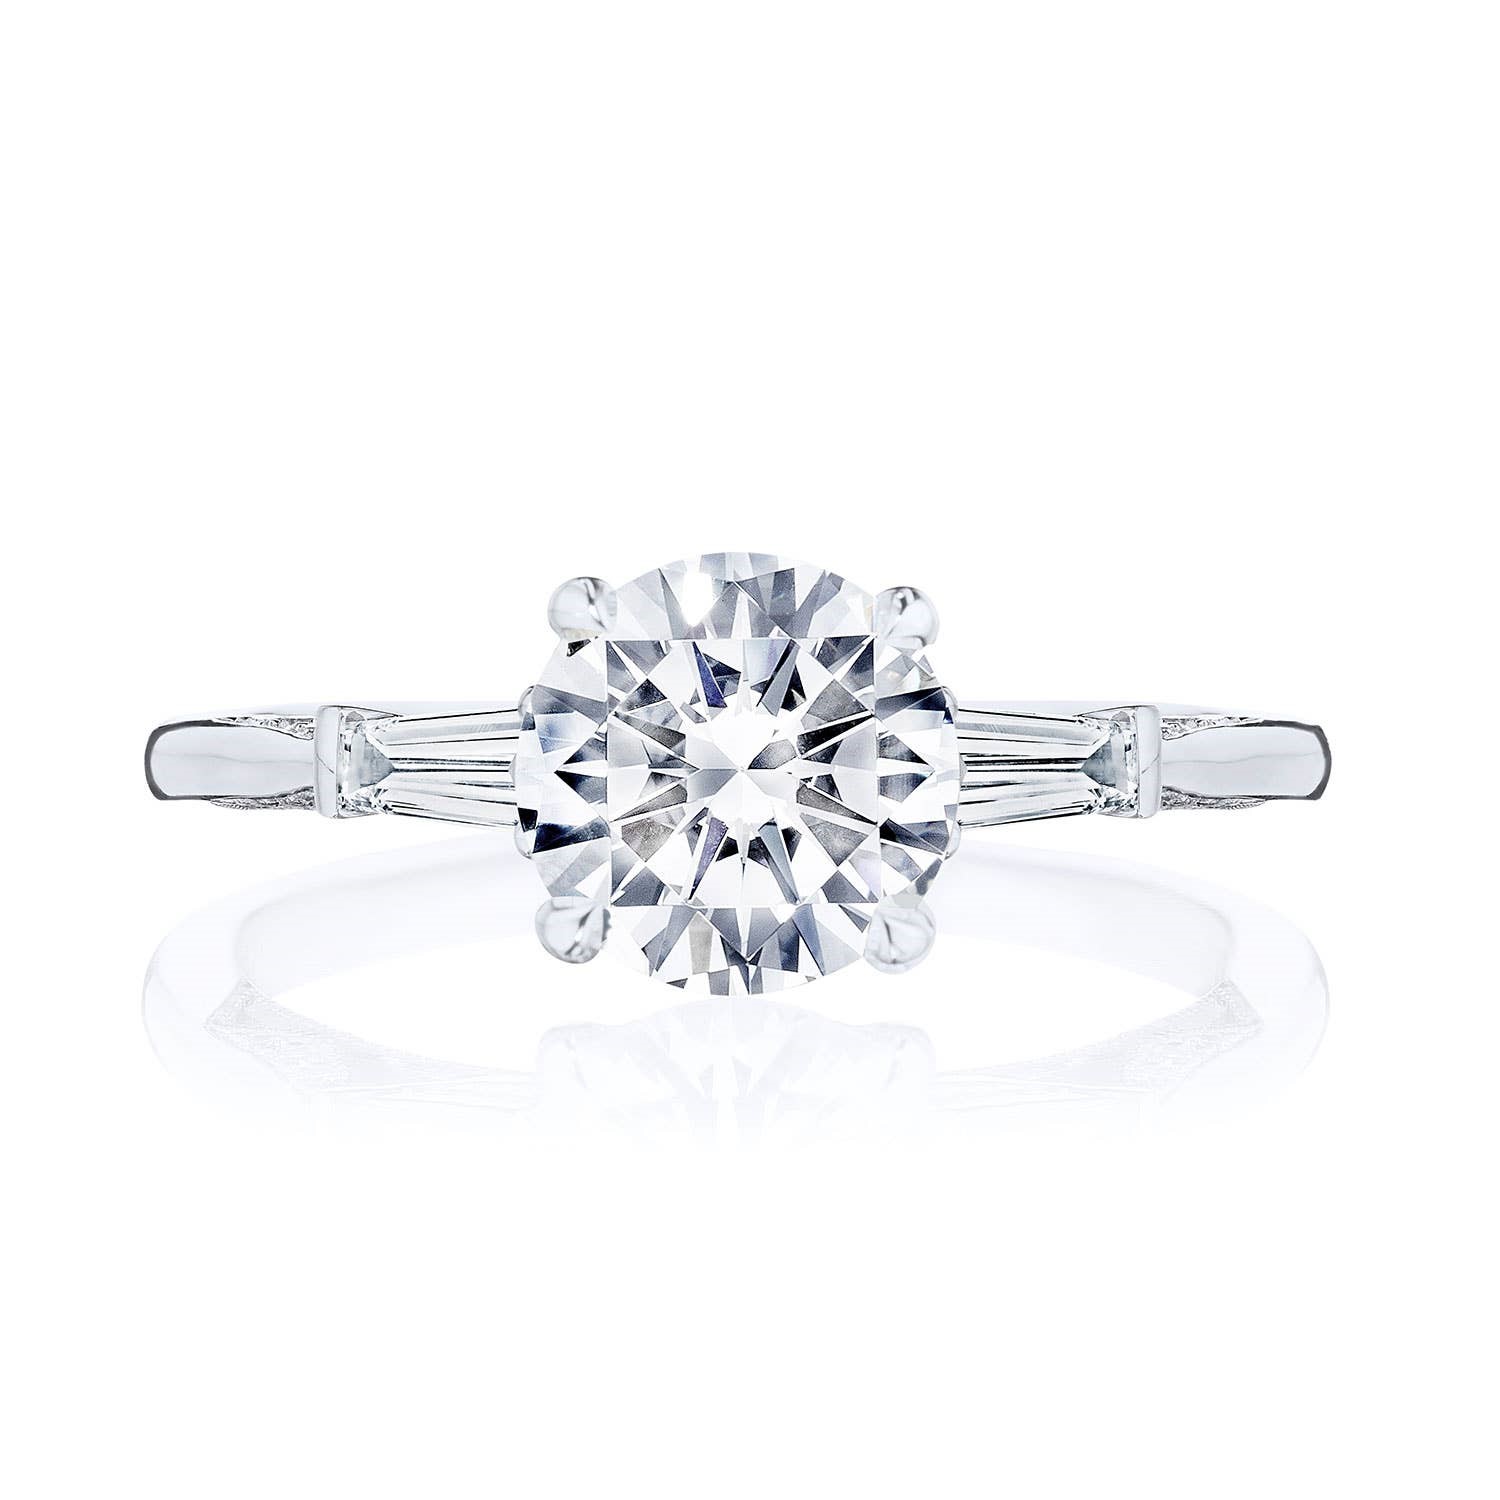 Tacori 18 Karat White Gold Simply Tacori Semi-Mount Ring With 0.35Tw Baguette Diamonds
*Setting only, center stone not included